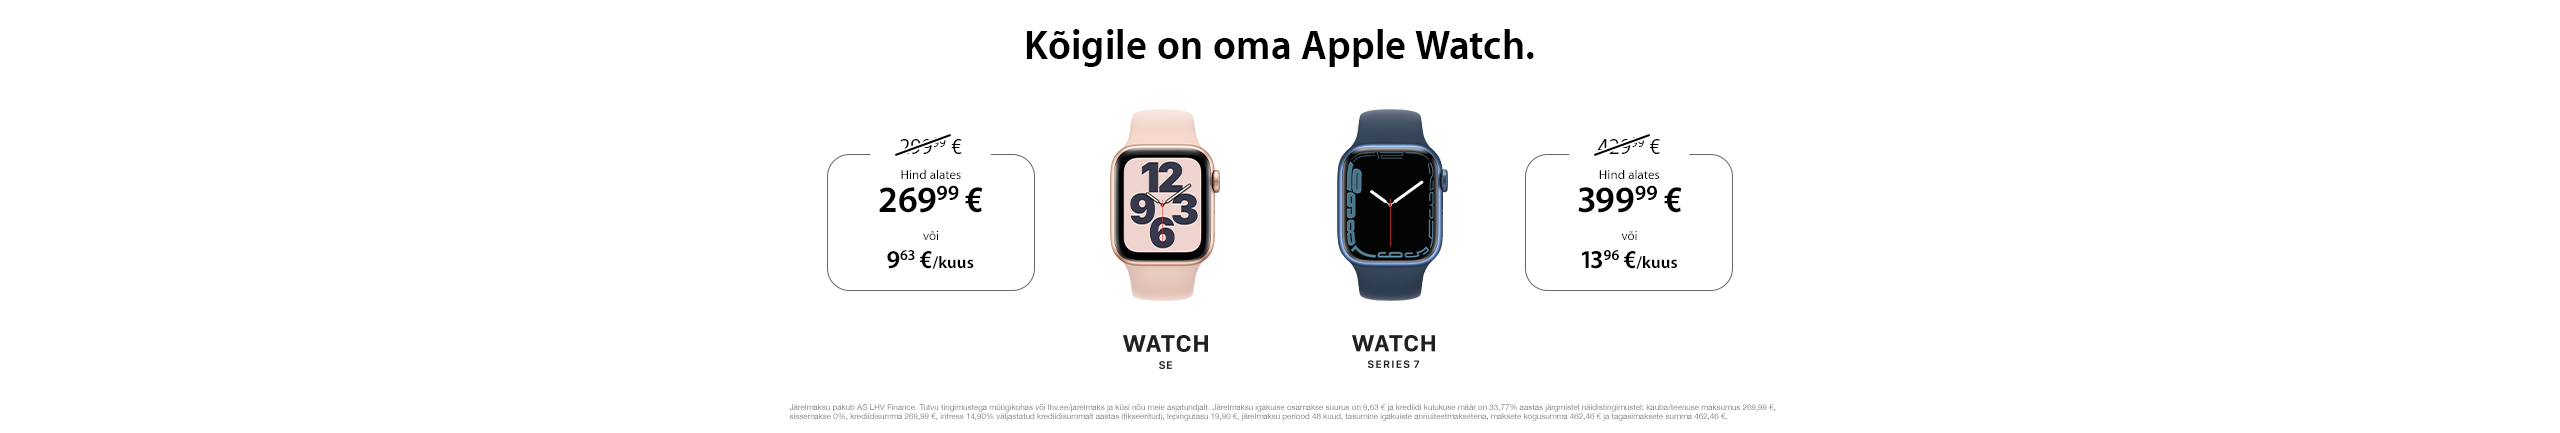 Apple watch special offer!